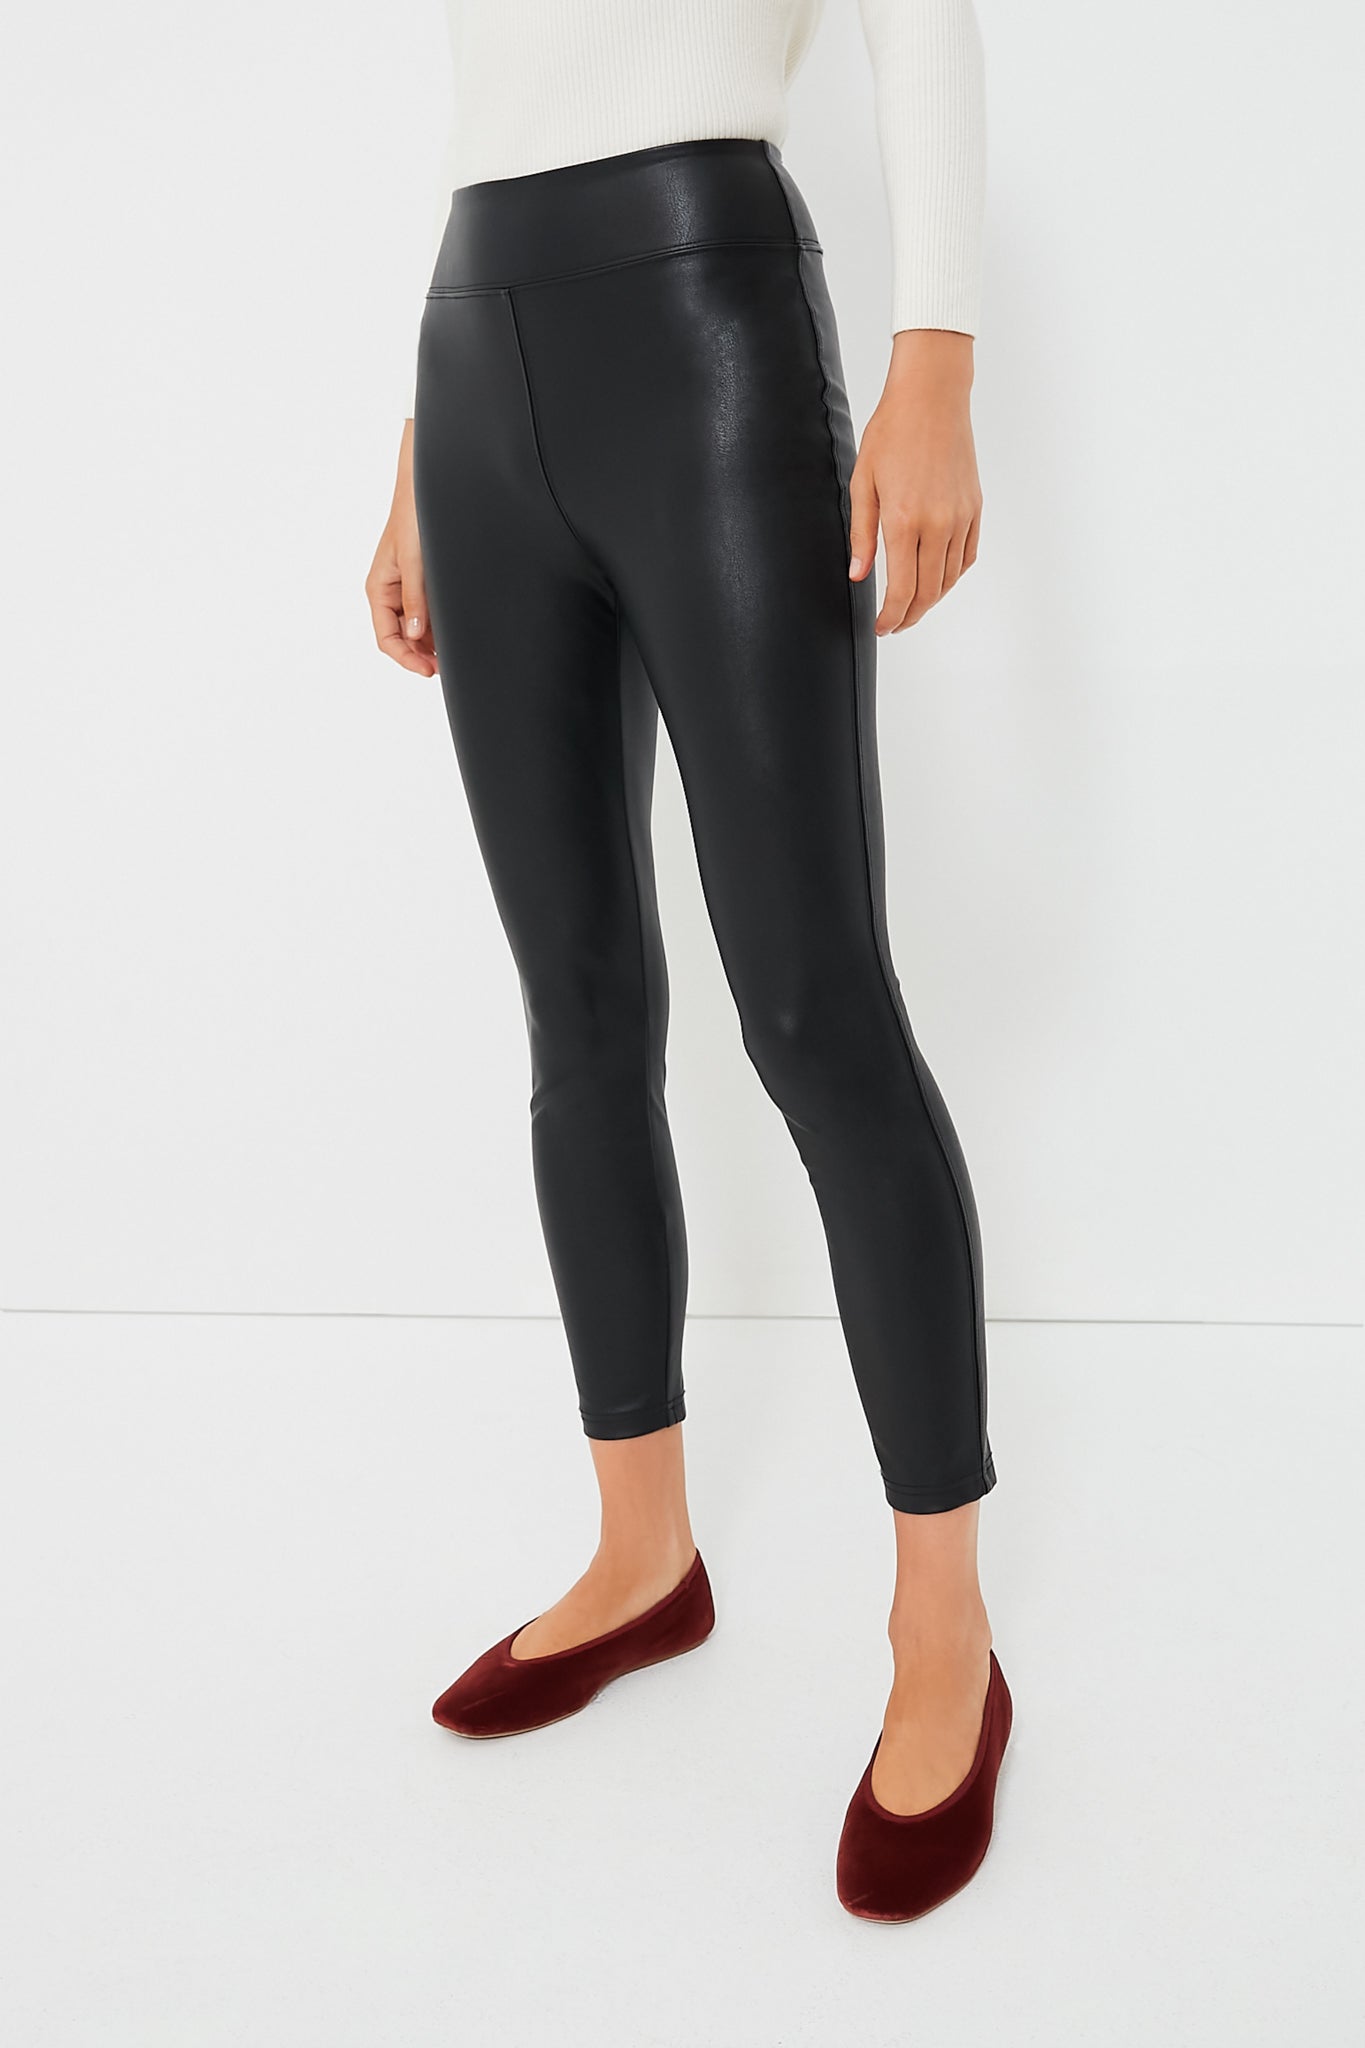 Spanx Faux Patent Leather Leggings - Ruby | BluePeppermint Boutique